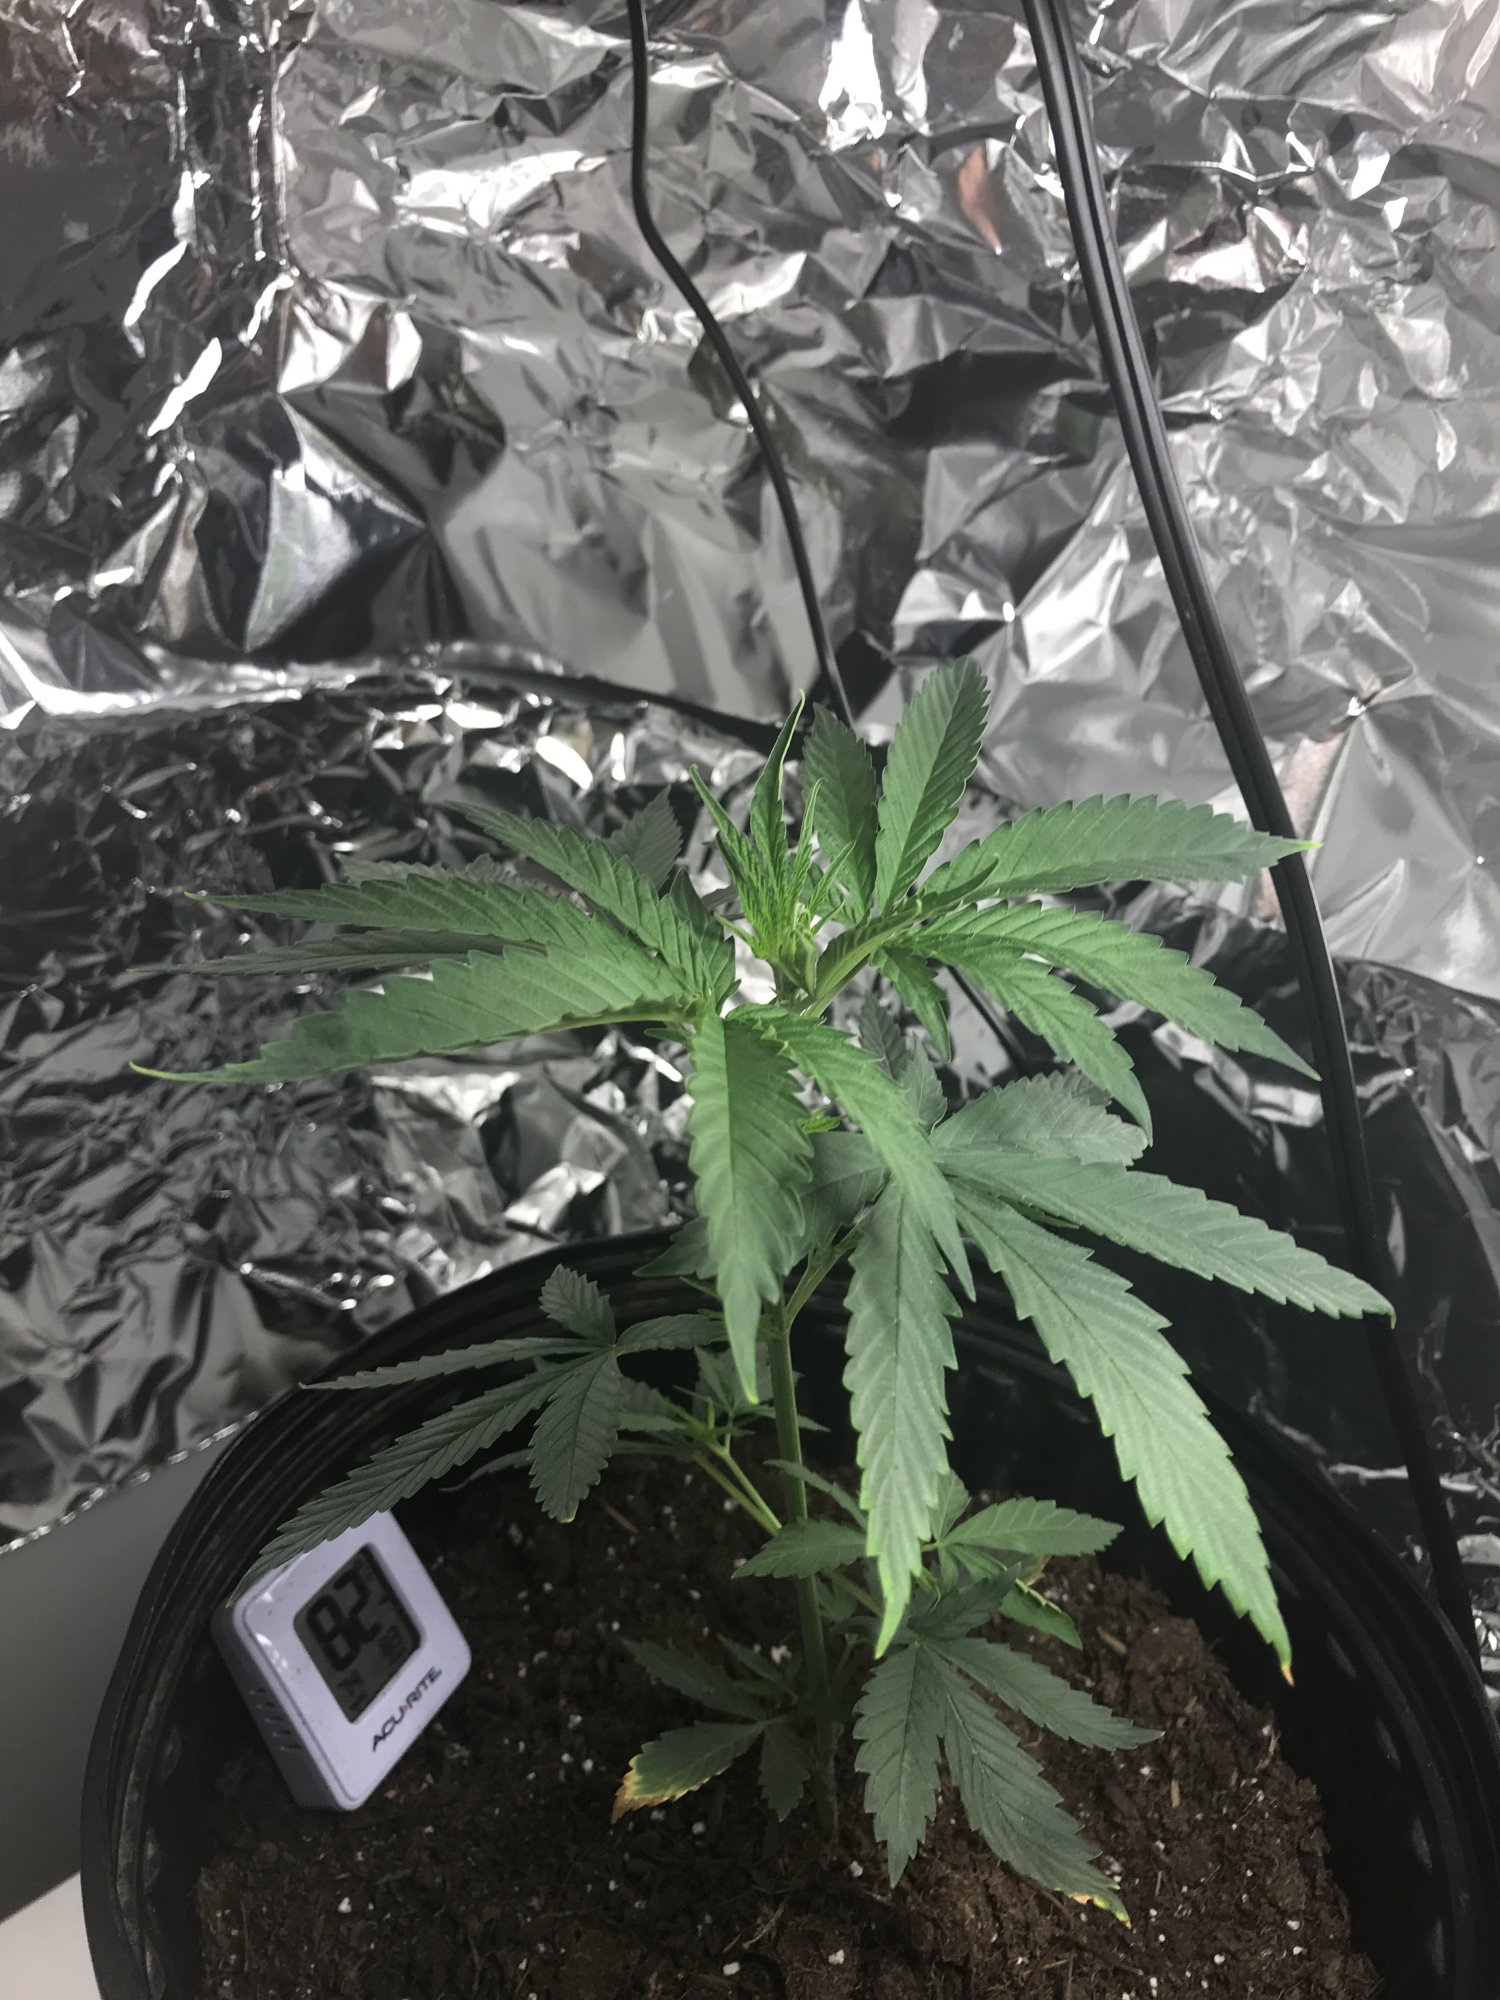 How should i train this plant